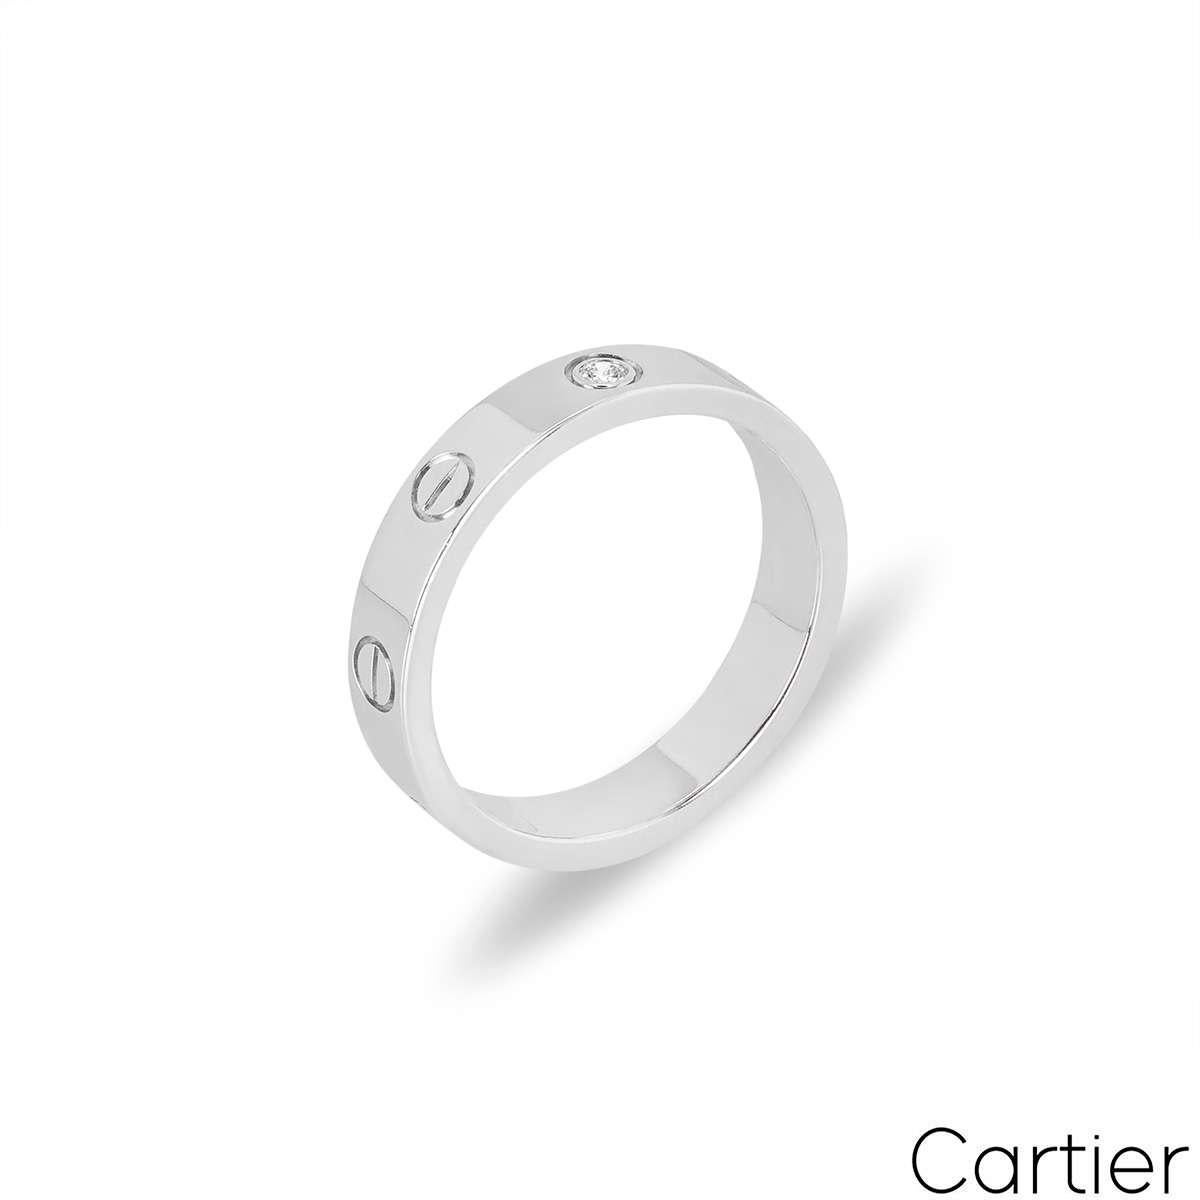 A Cartier diamond wedding band, in white gold from the Love collection. Compromising of the iconic Cartier screws and a single round brilliant cut diamond set in the centre, totalling 0.02ct. Measuring 4mm in width, the ring is a size UK J - EU 48